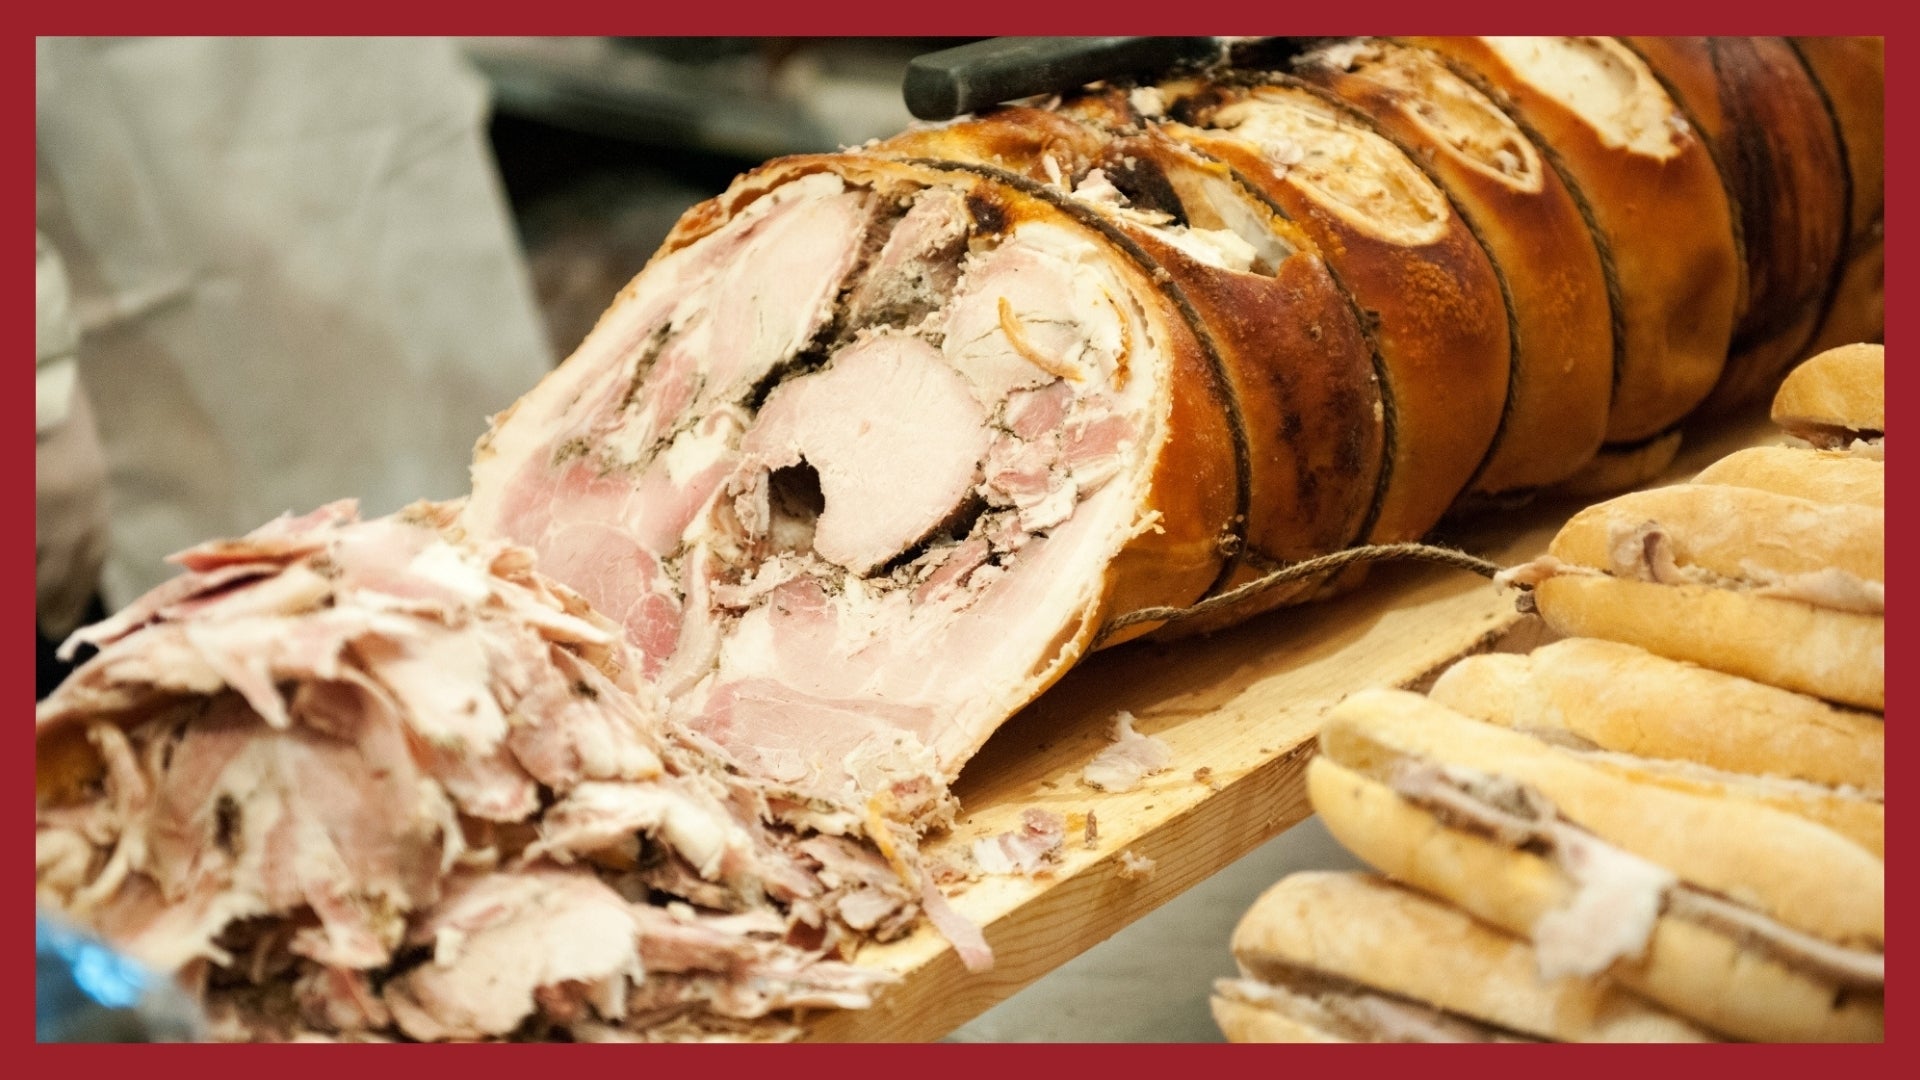 A whole porchetta being cut up into thin slices with porchetta sandwiches in the foreground.